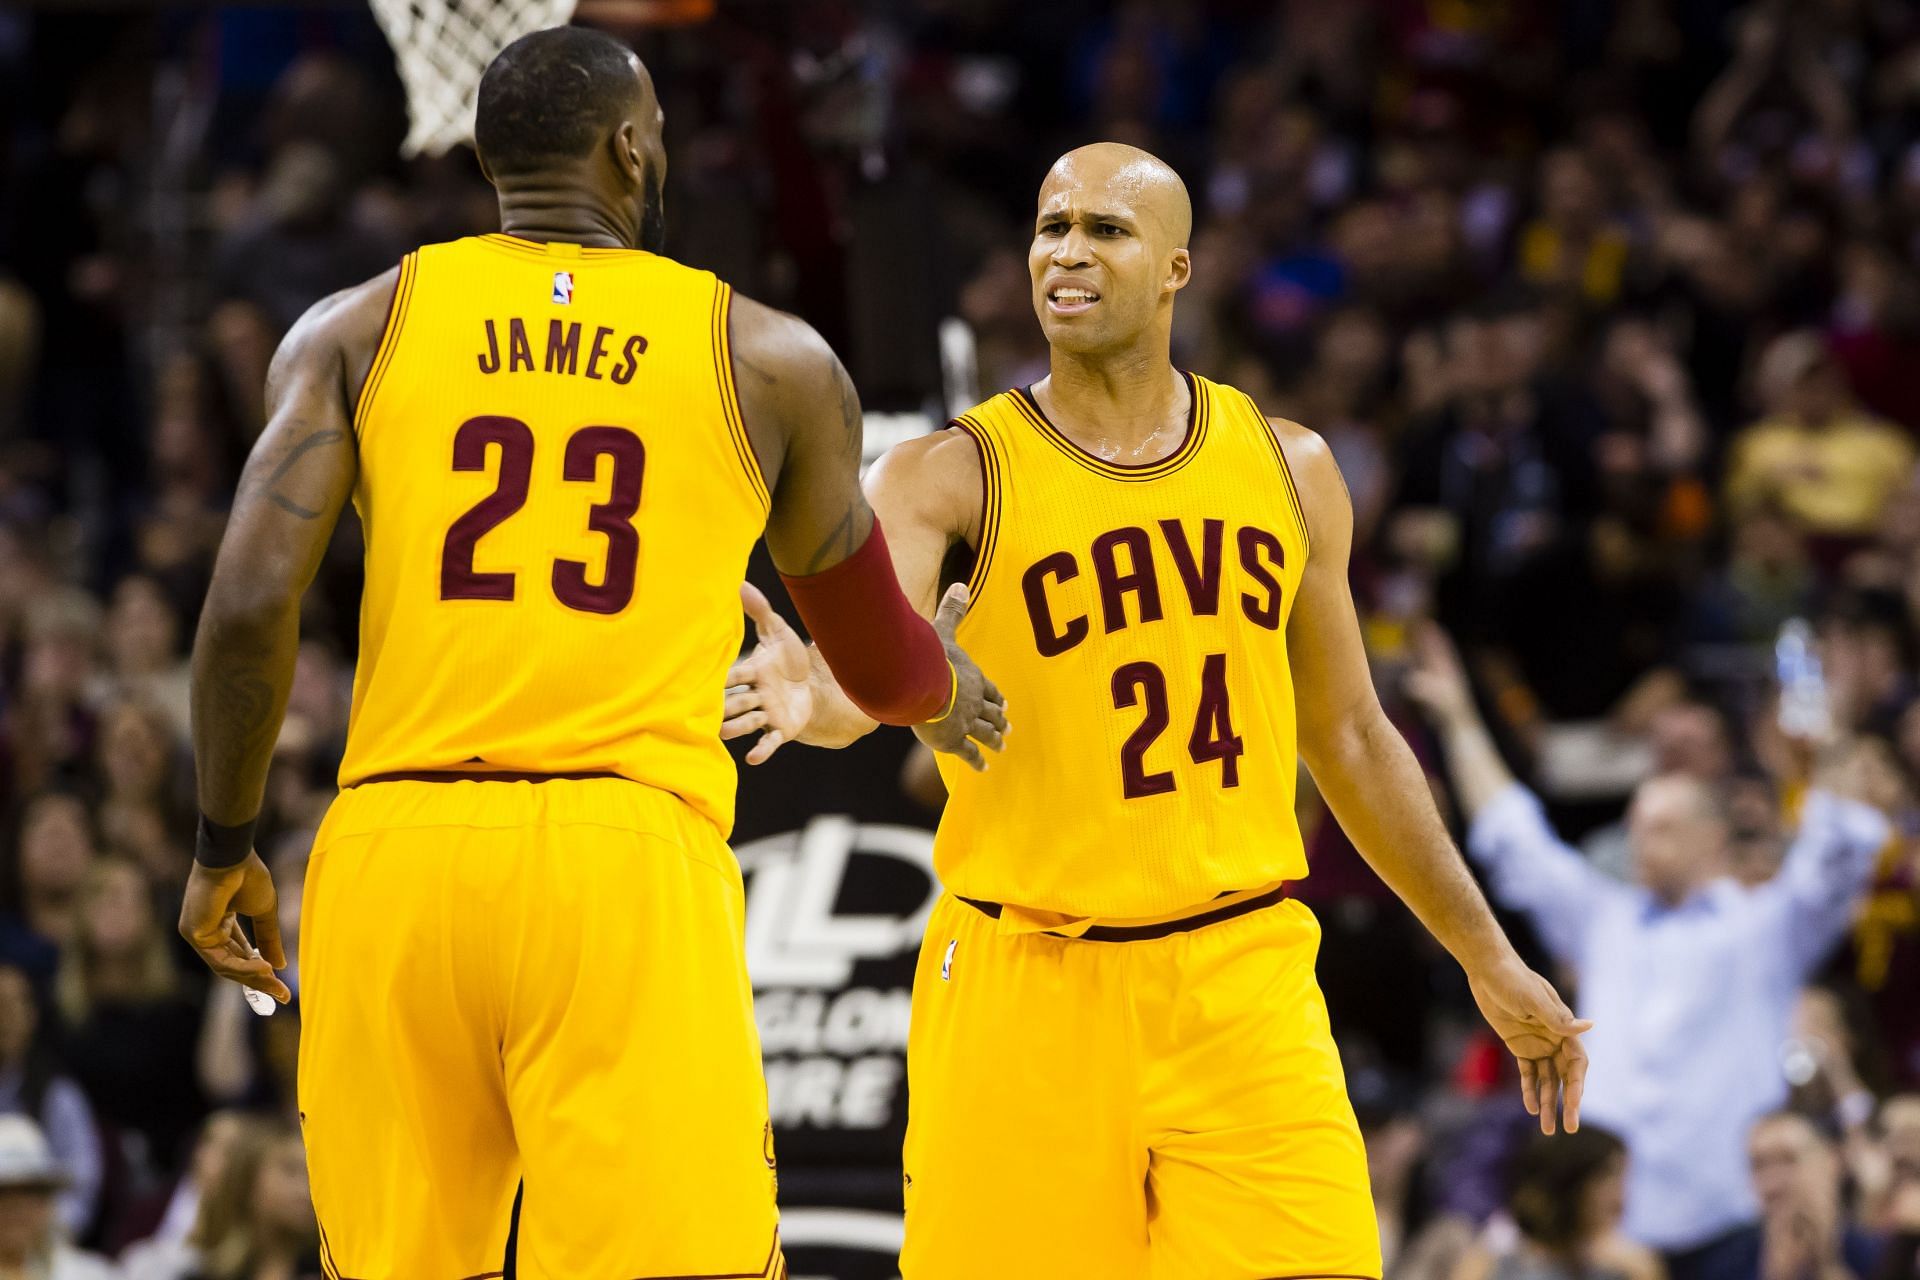 LeBron James #23 of the Cleveland Cavaliers and Richard Jefferson #24 celebrate after a play during the first half against the Washington Wizards at Quicken Loans Arena on March 25, 2017 in Cleveland, Ohio.